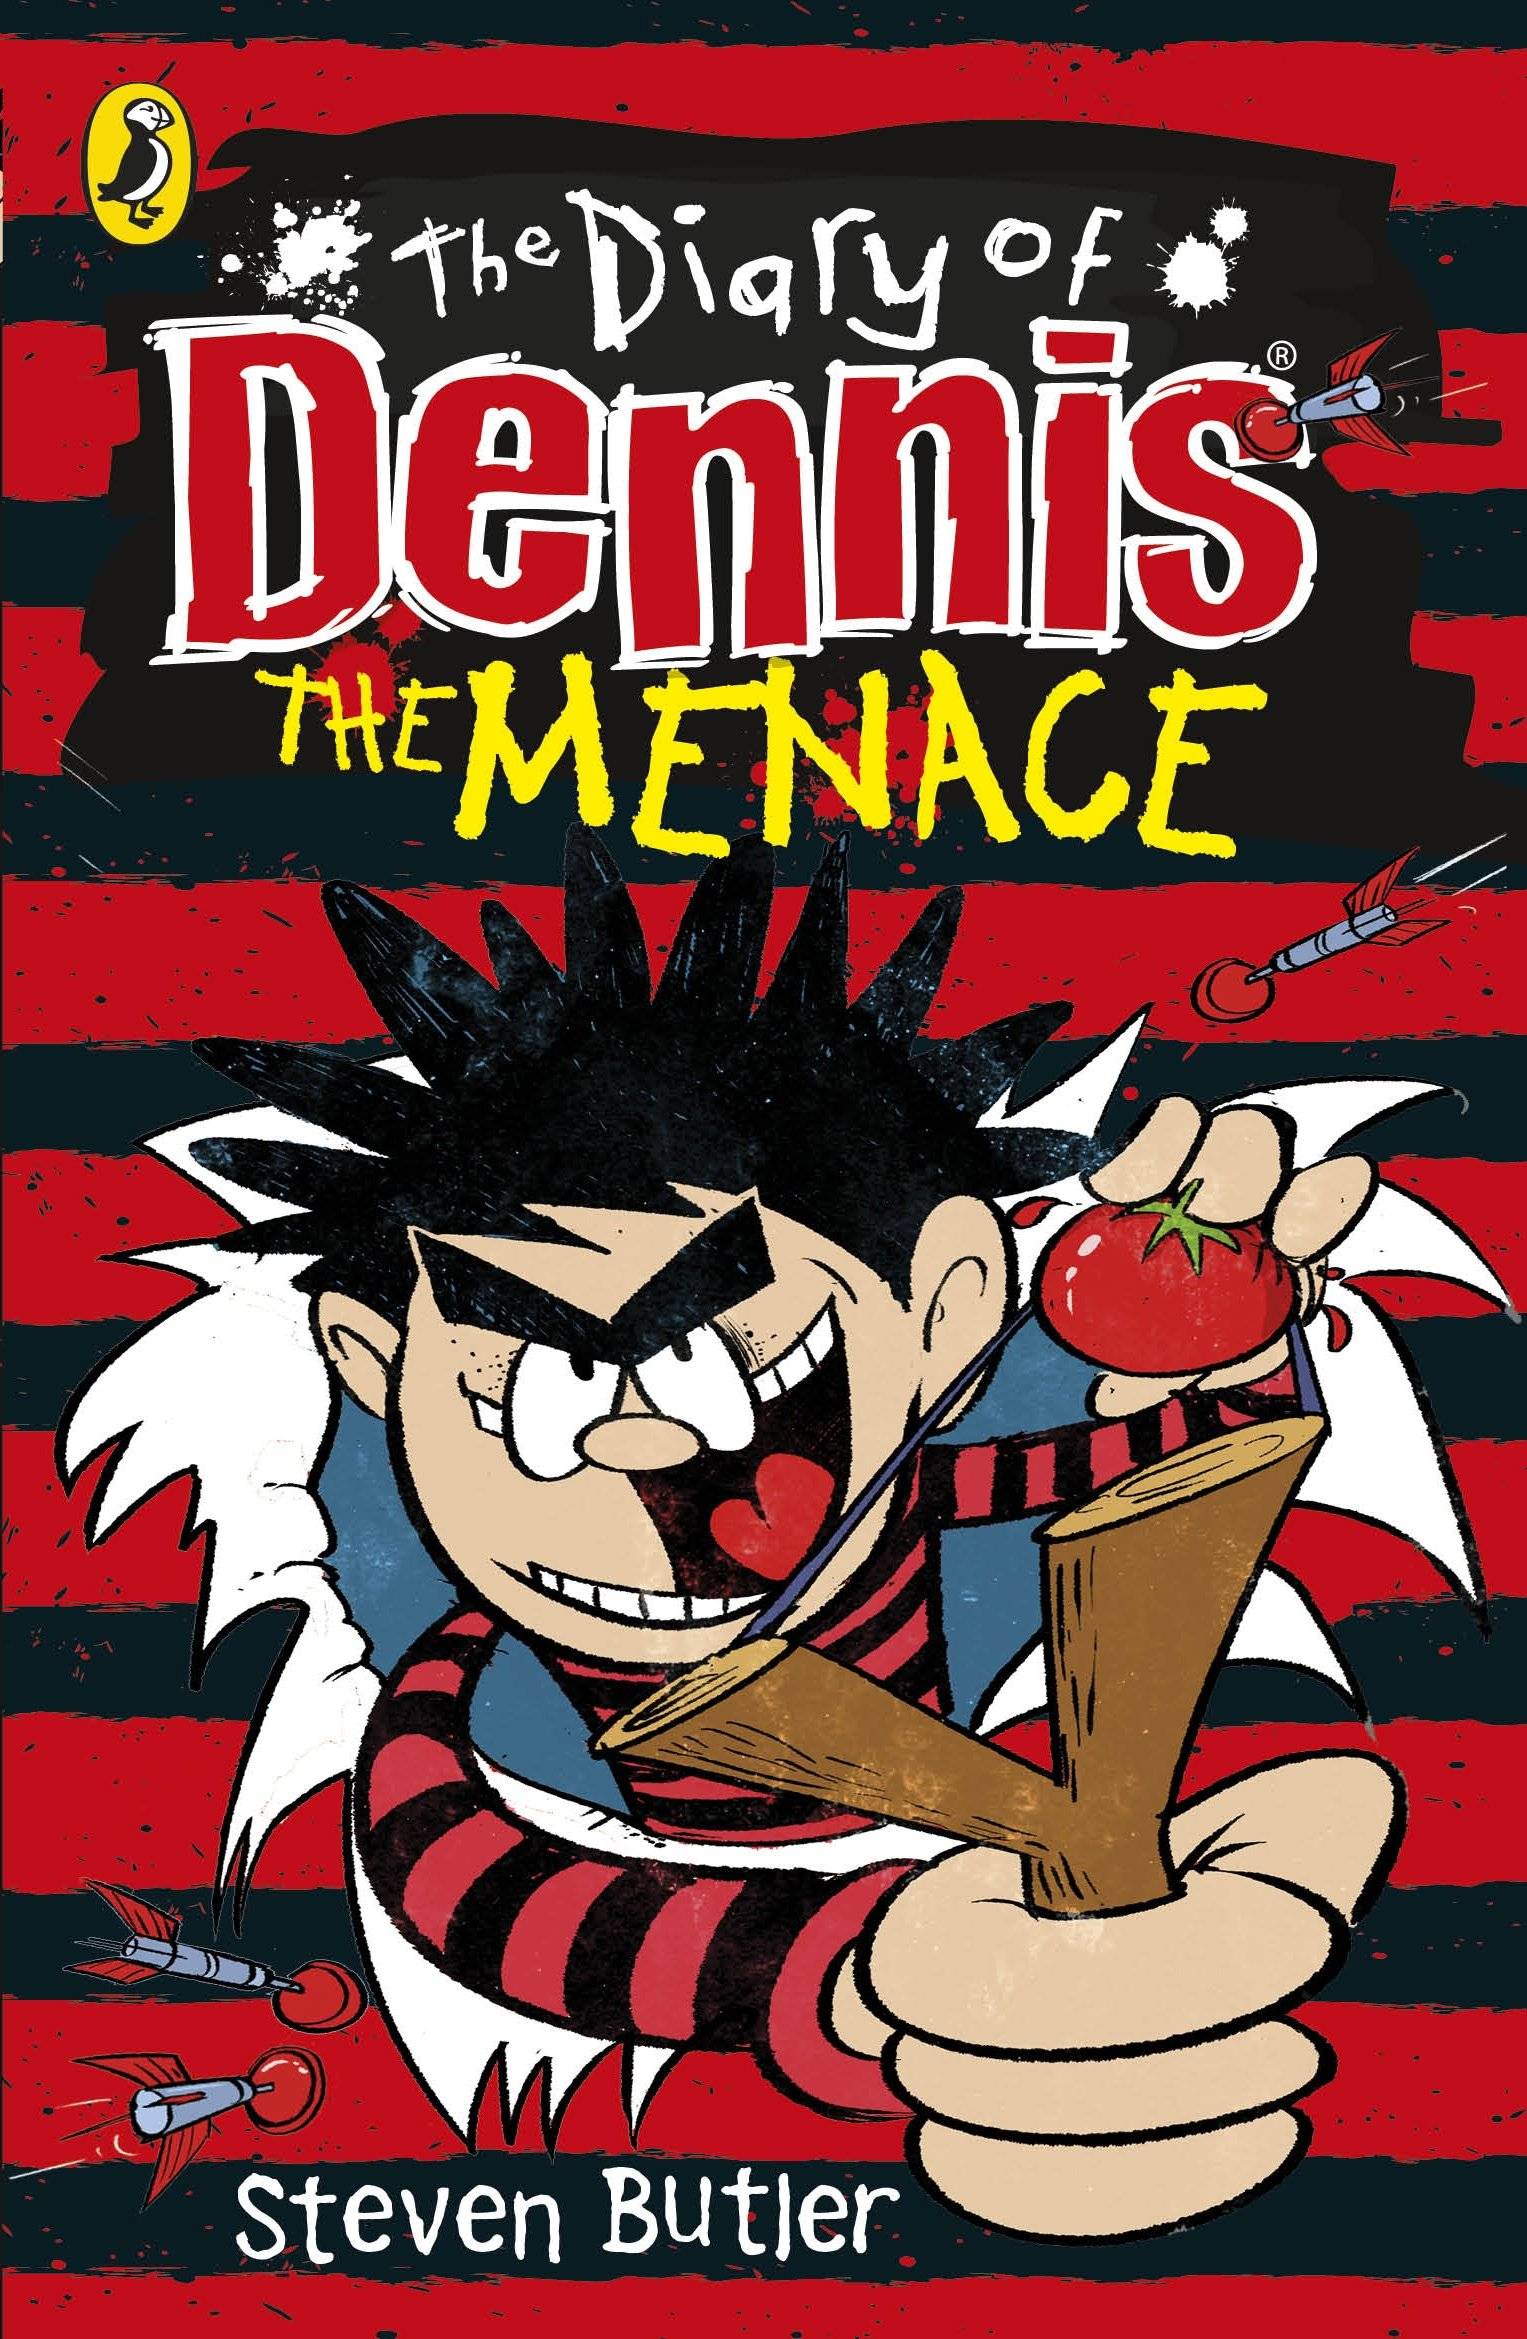 IMG : The Diary of Dennis the menace #1